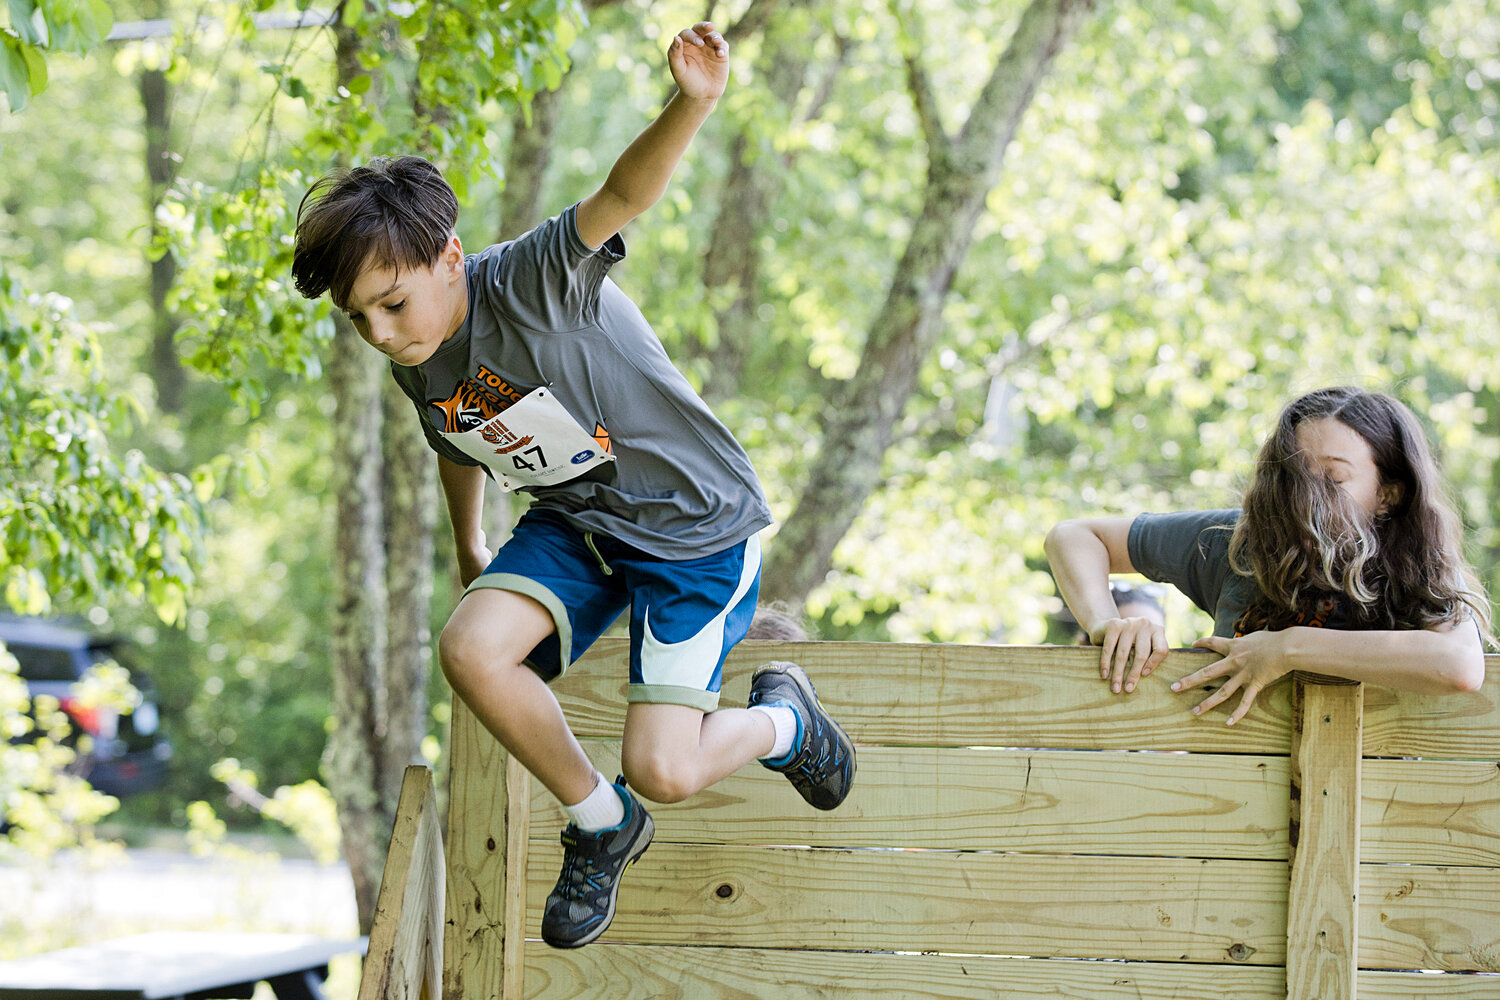 A competitor jumps over a wall obstacle while running the Tough Tiger adventure race.